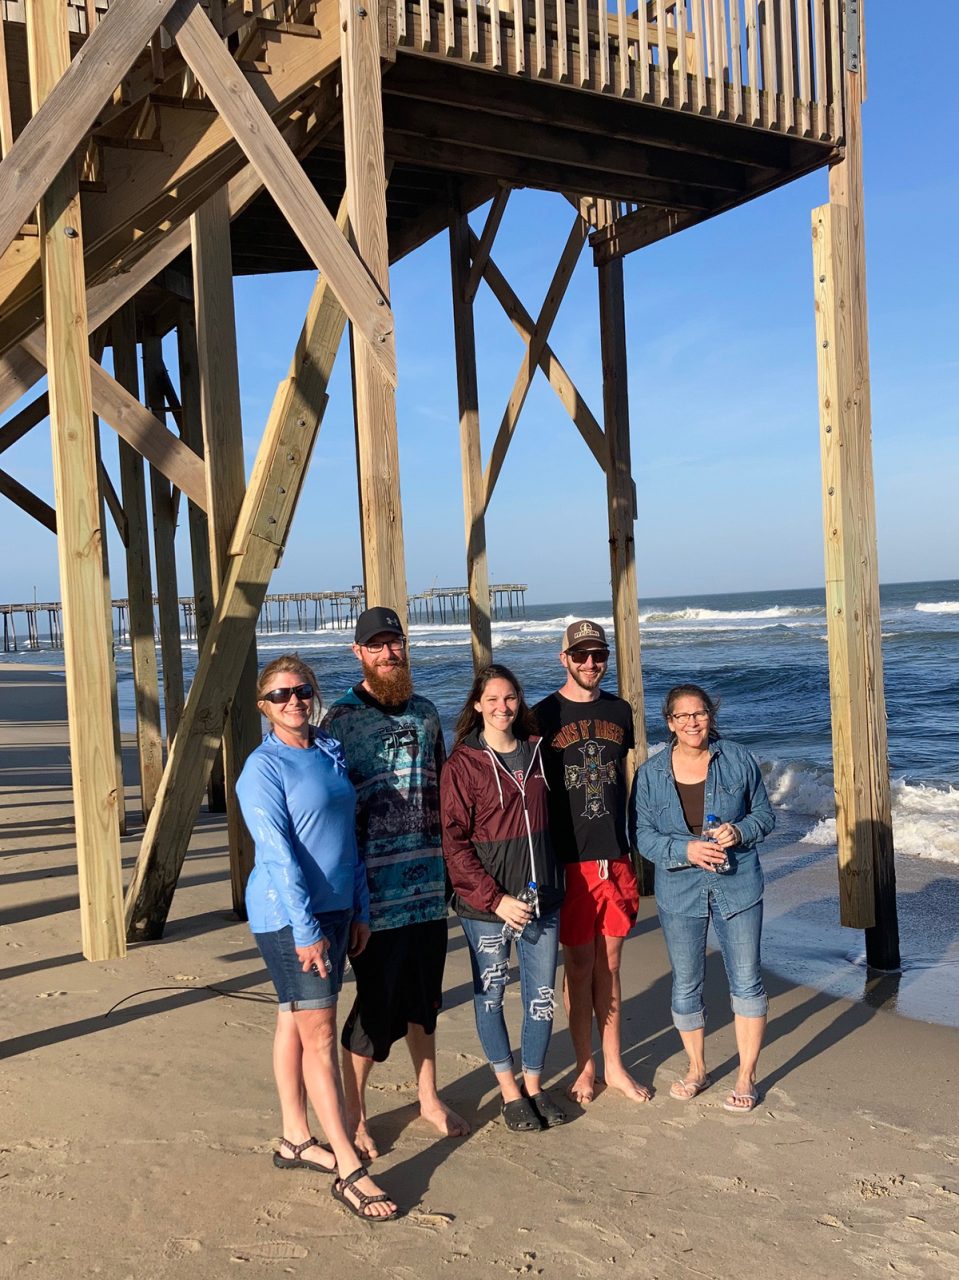 Hope Lineman, left, and her family visit Hatteras Island where several homes are threatened by the ocean. Photo: Catherine Kozak